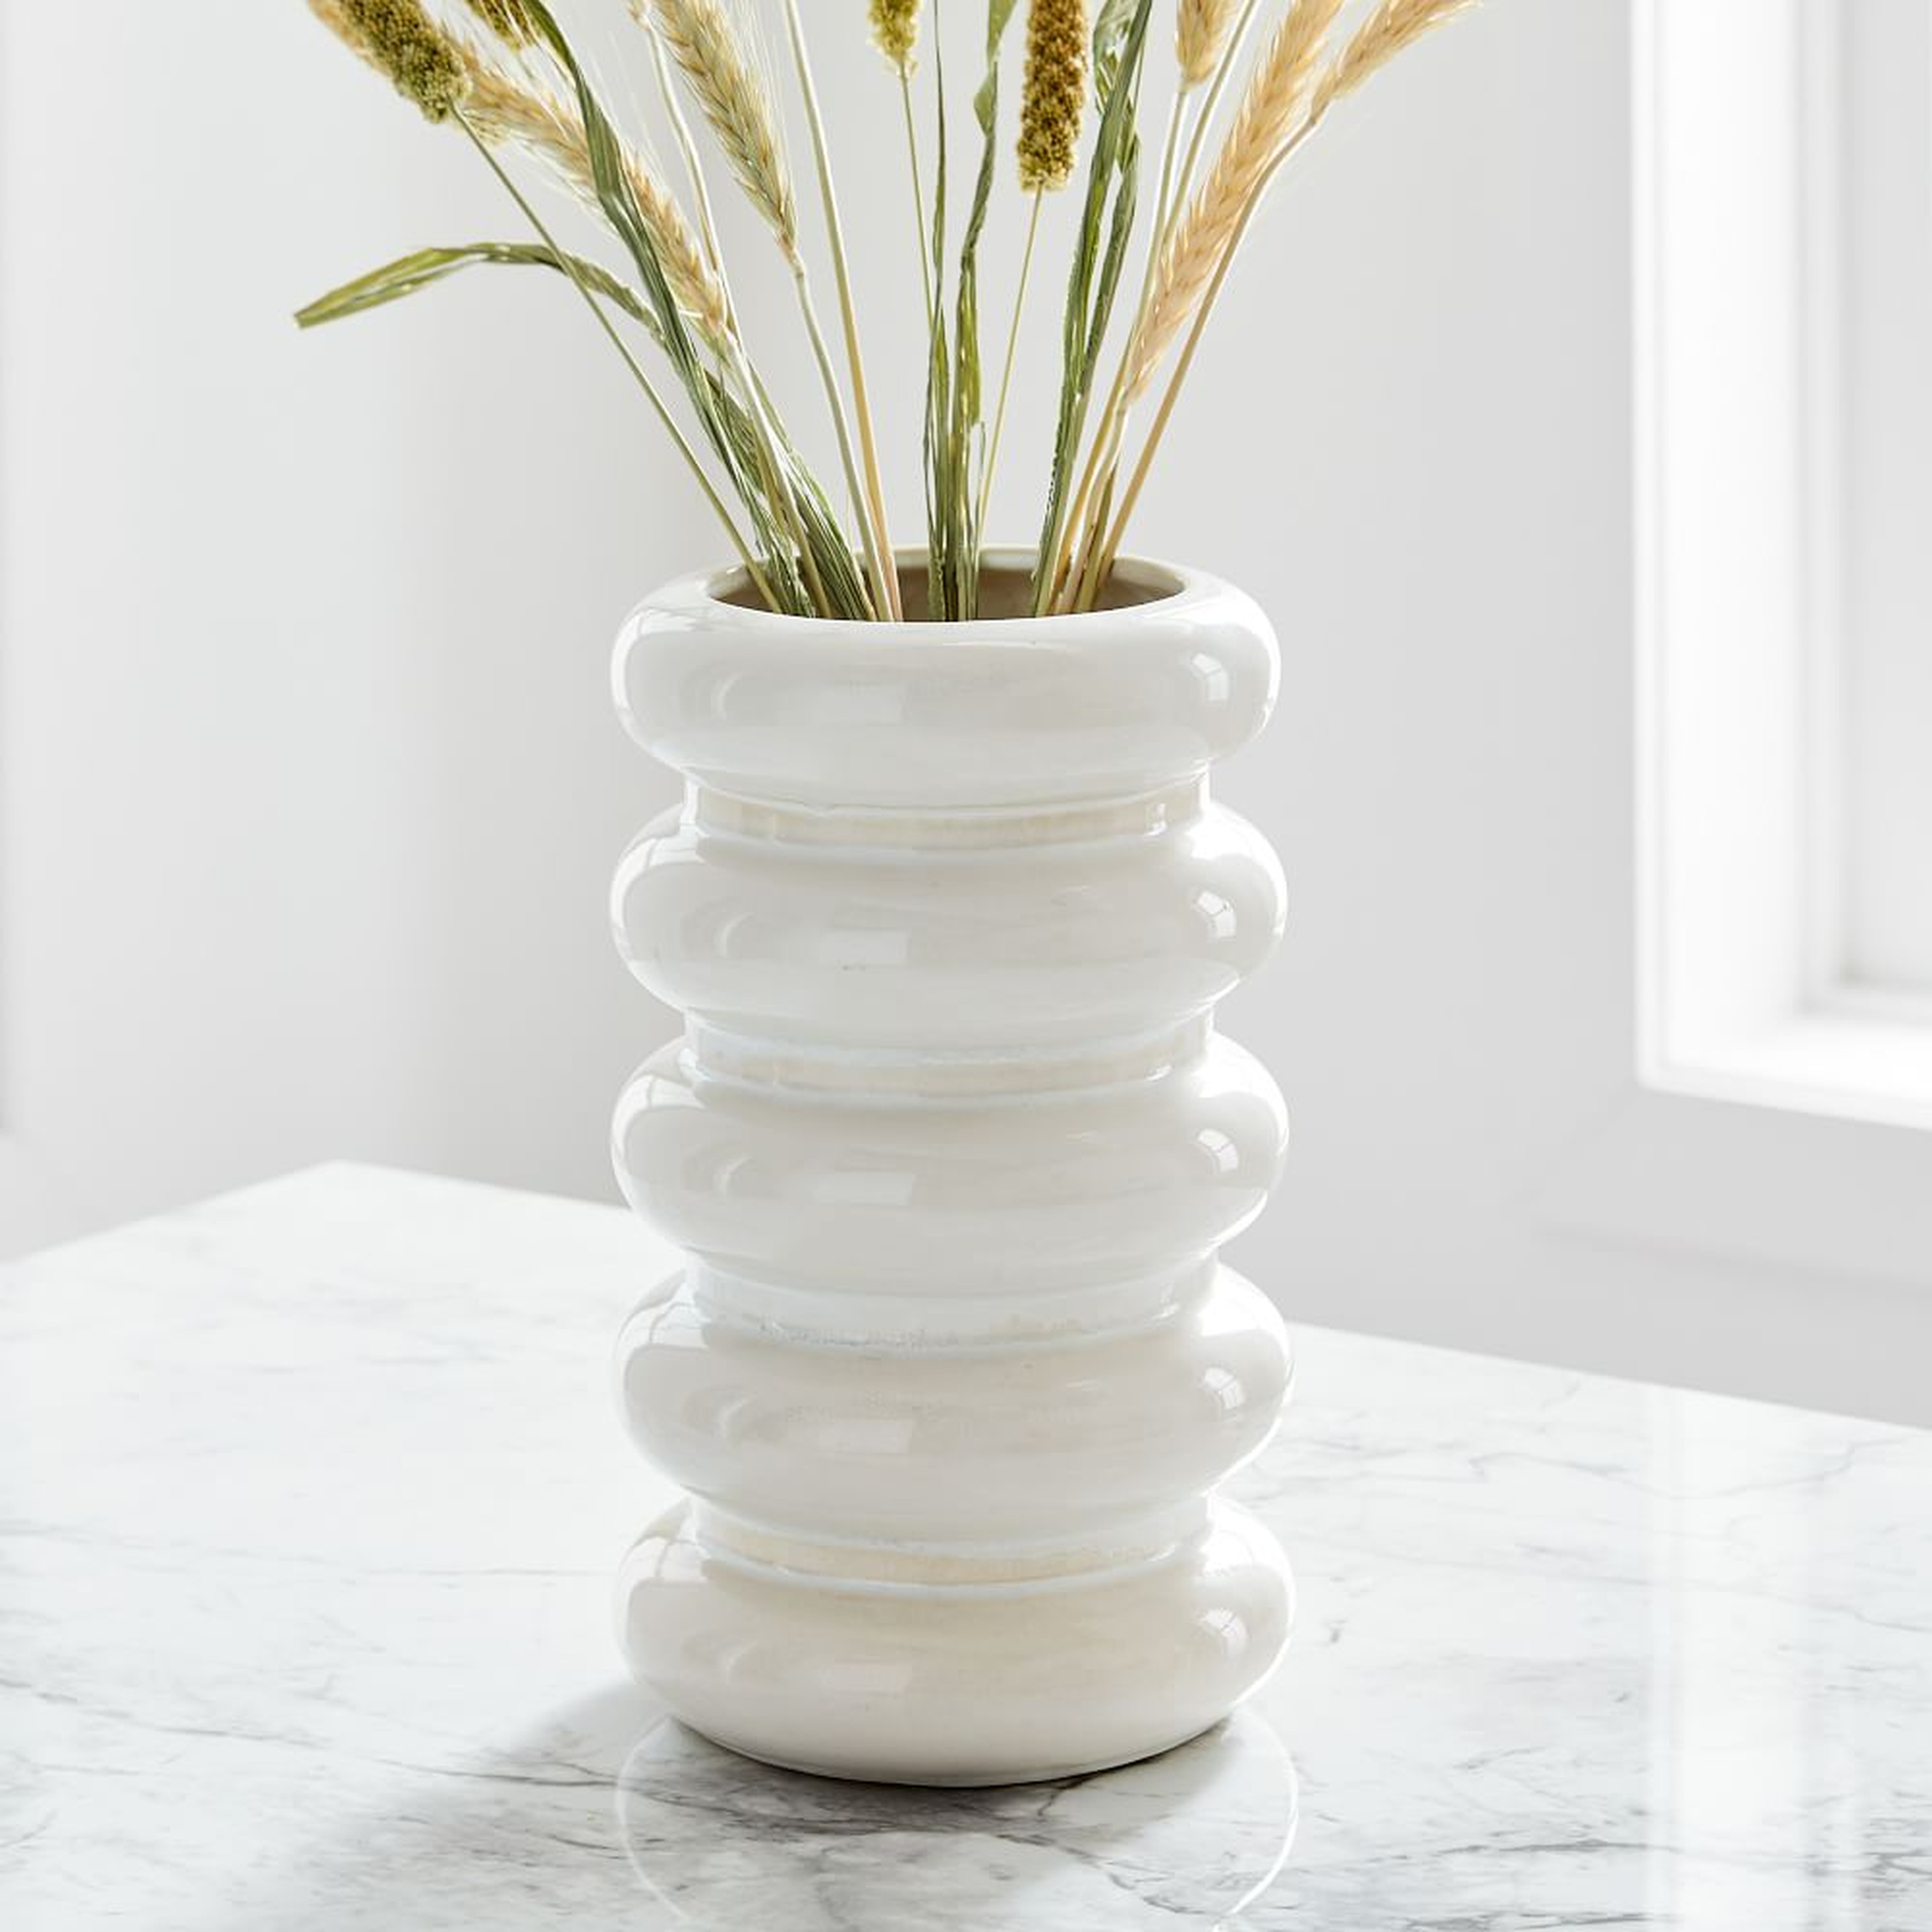 Stepped Form Ceramic Round Stacked, Transculent White - West Elm